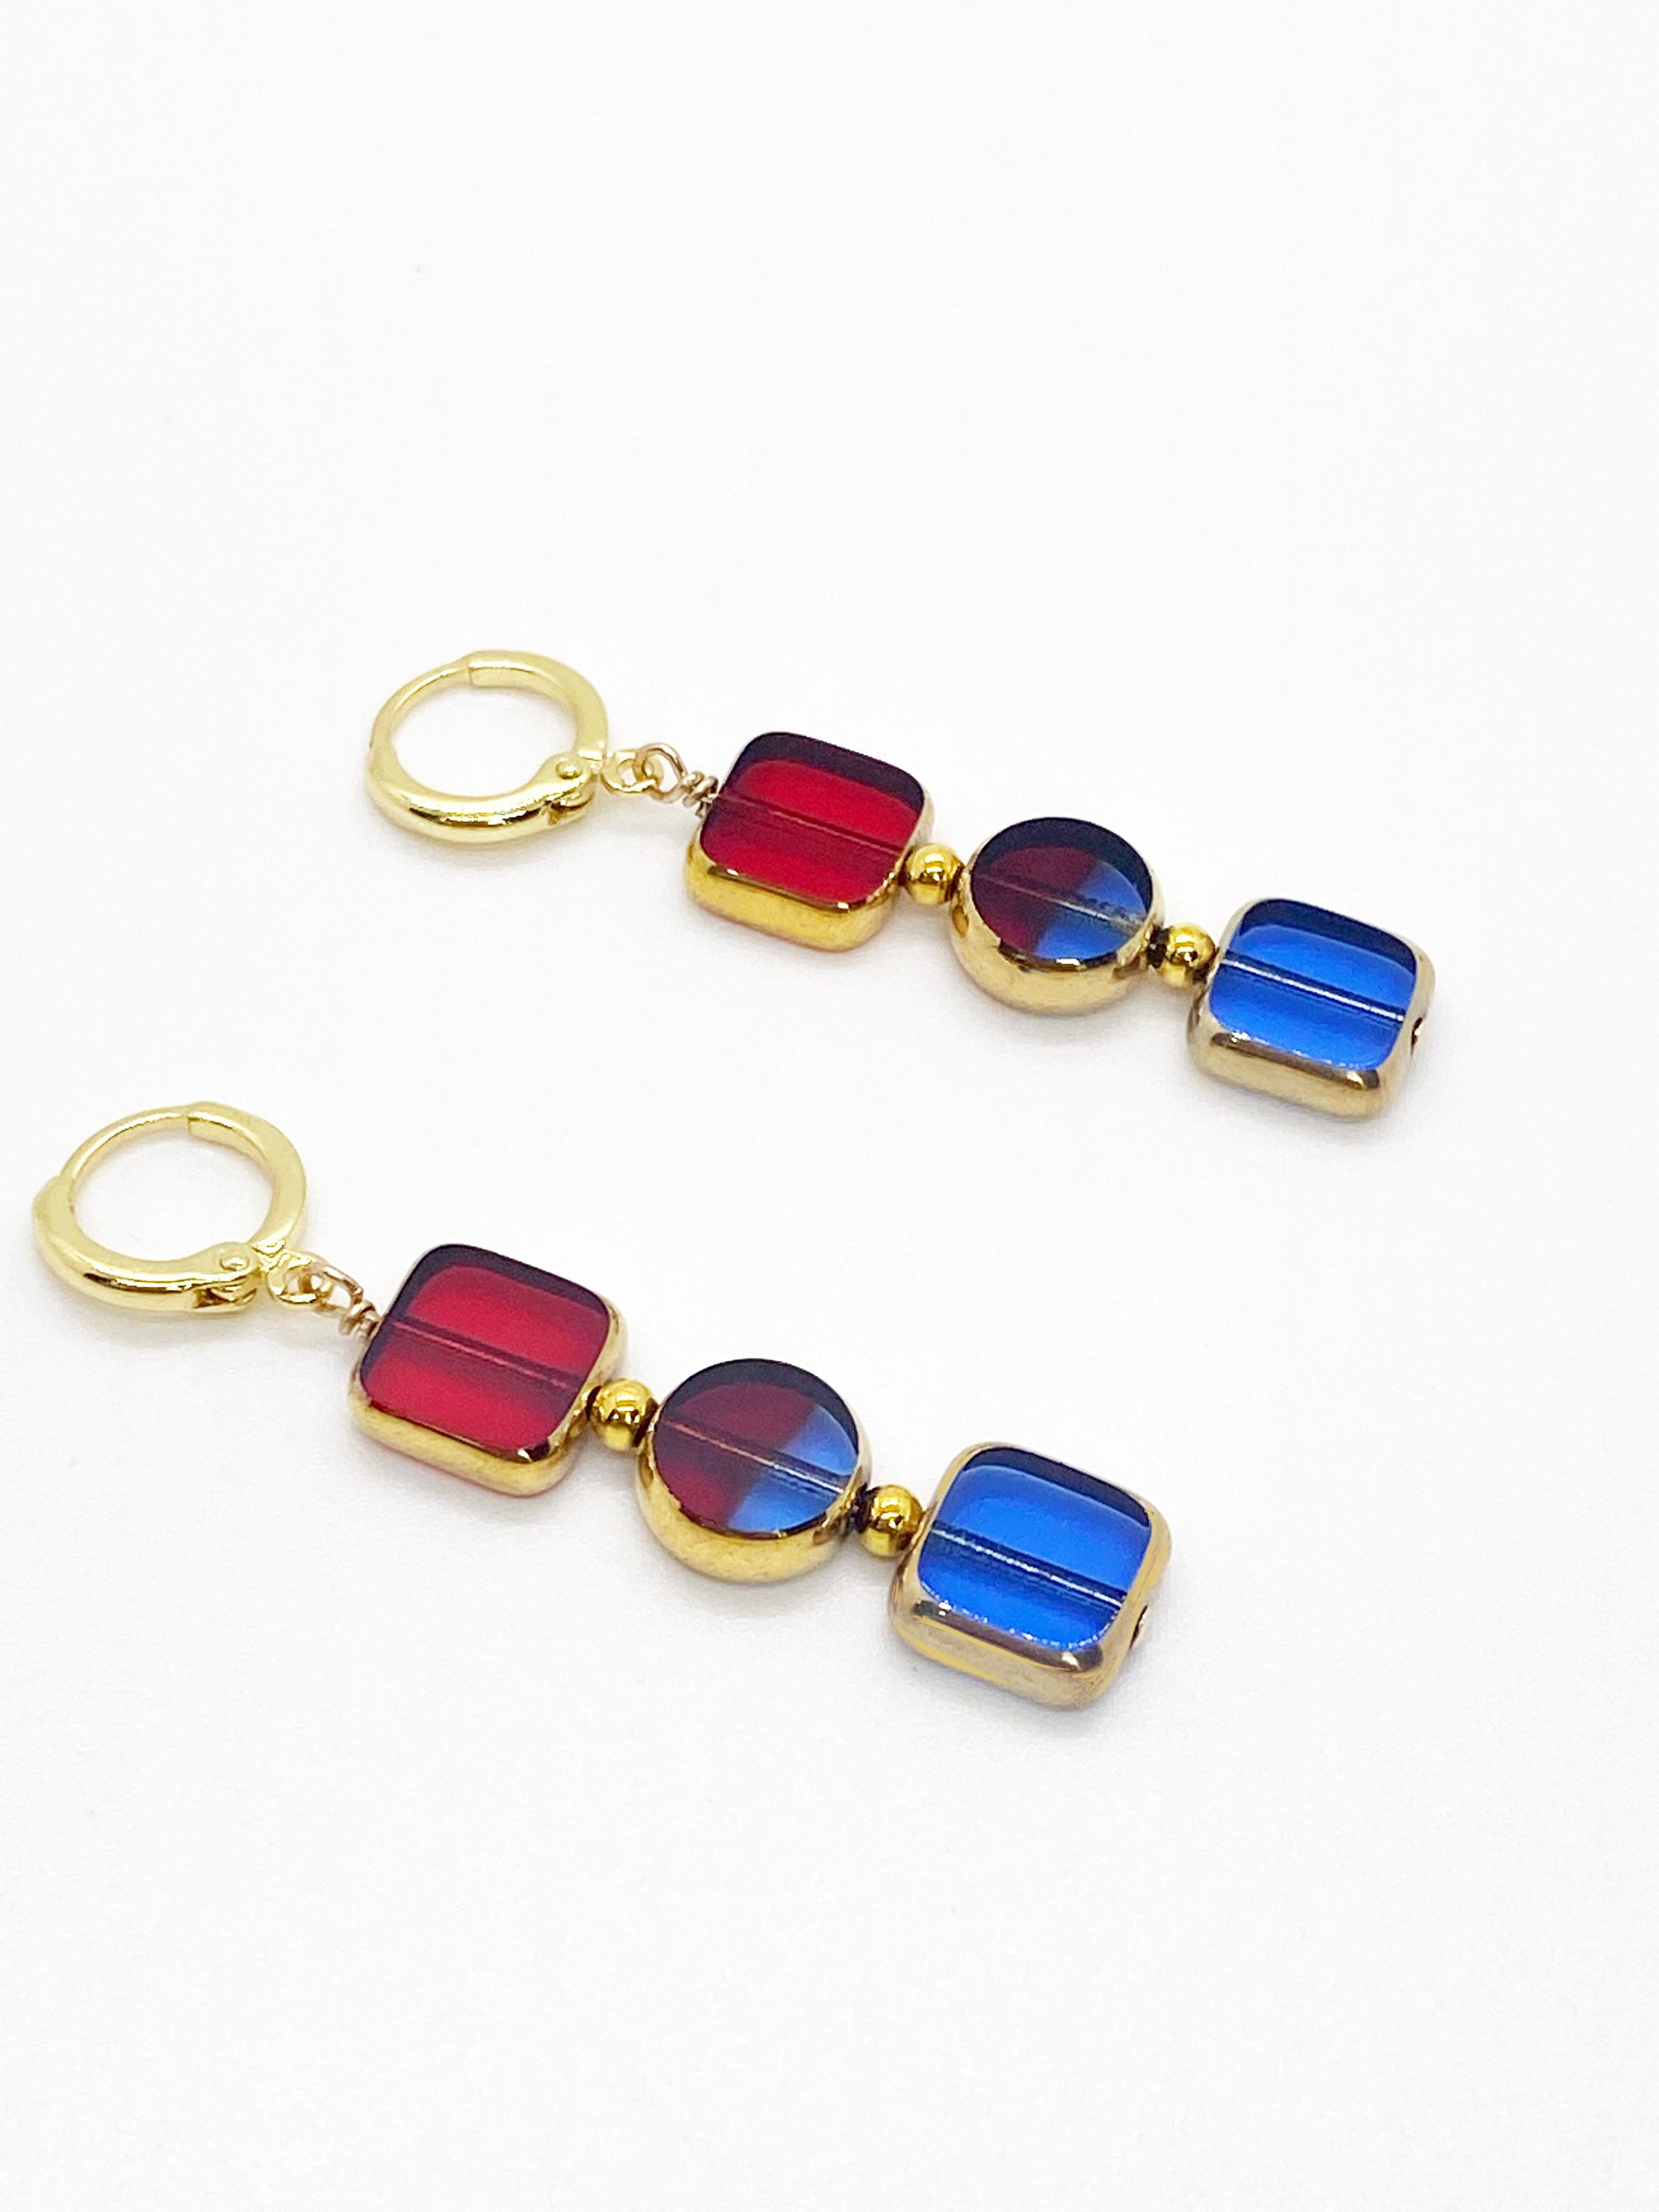 Each earring is composed of 3 vintage translucent glass beads. The glass beads are framed with 24K gold and were handmade in Germany between the 1920s - 1960s. They are now considered rare and collectible. The beads dangle on 24K gold-filled earring